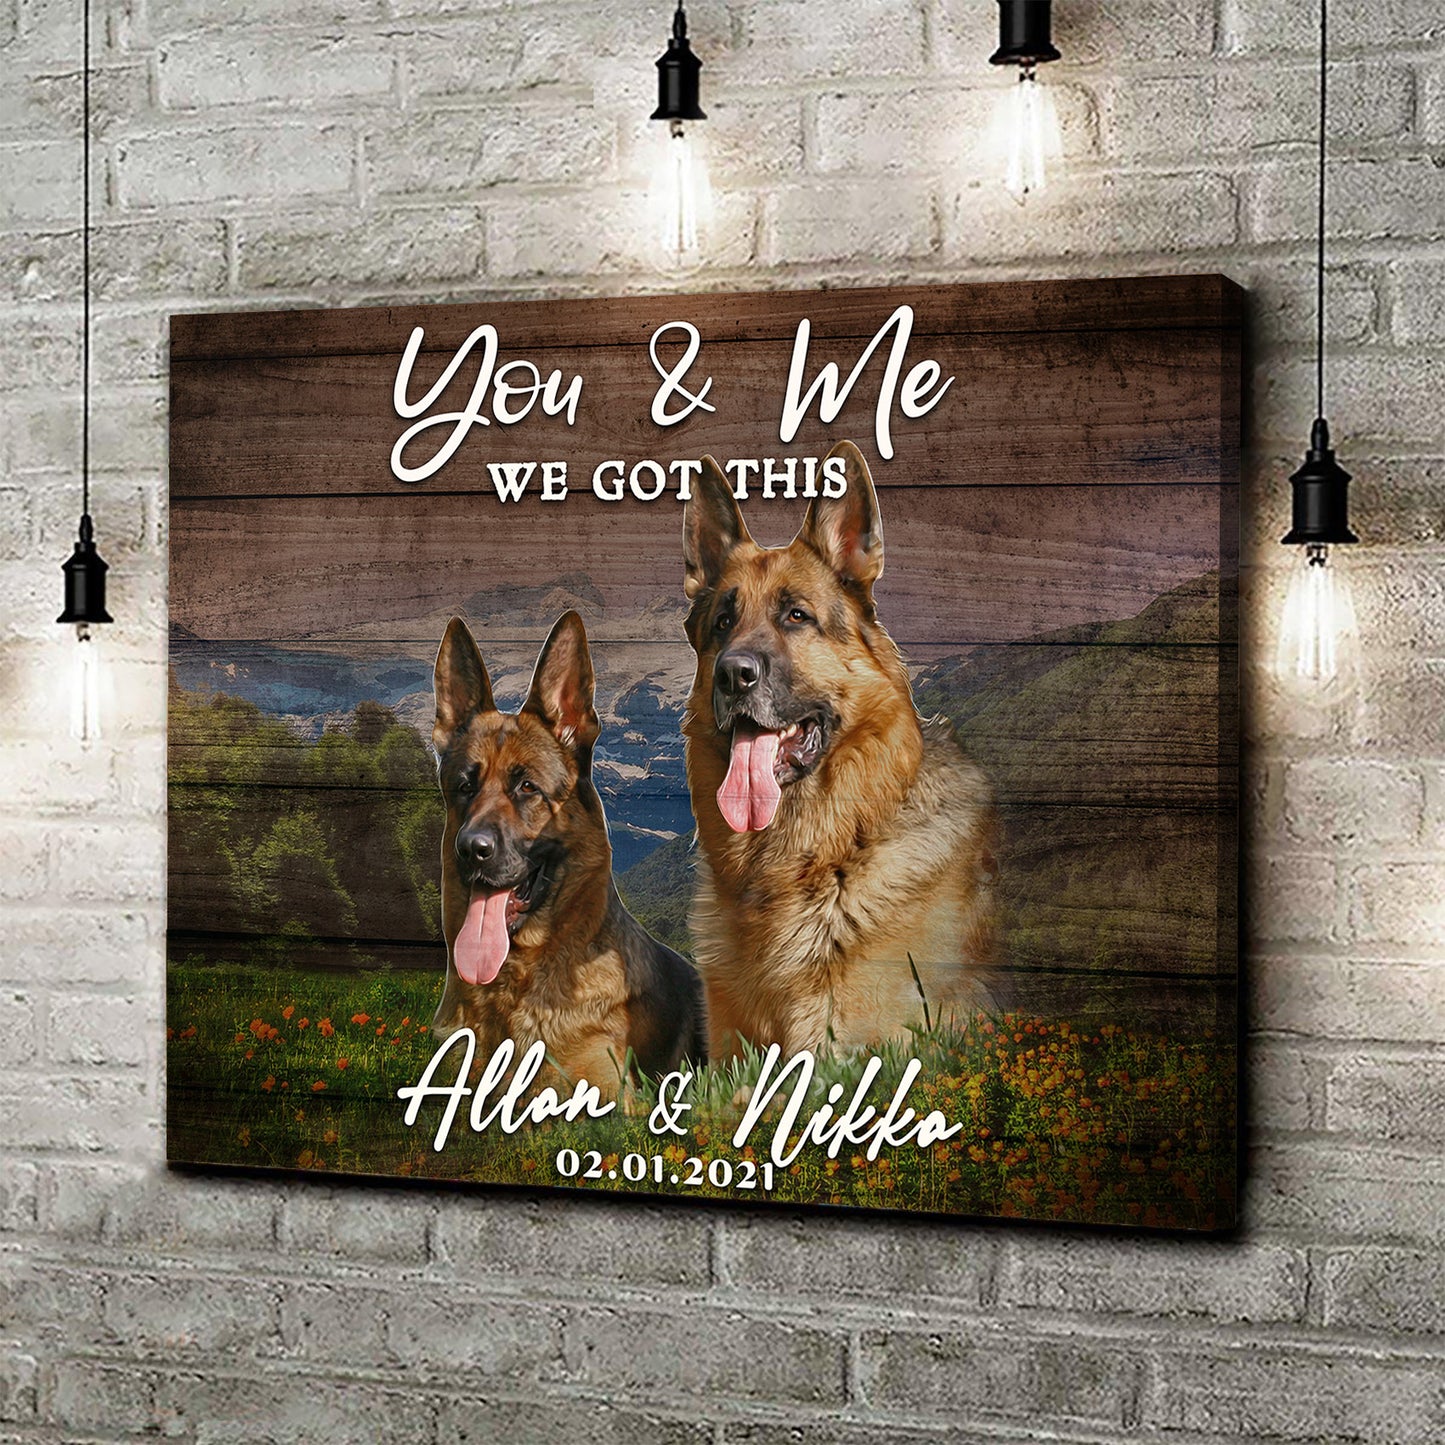 We Got This Couple Dog Sign - Image by Tailored Canvases